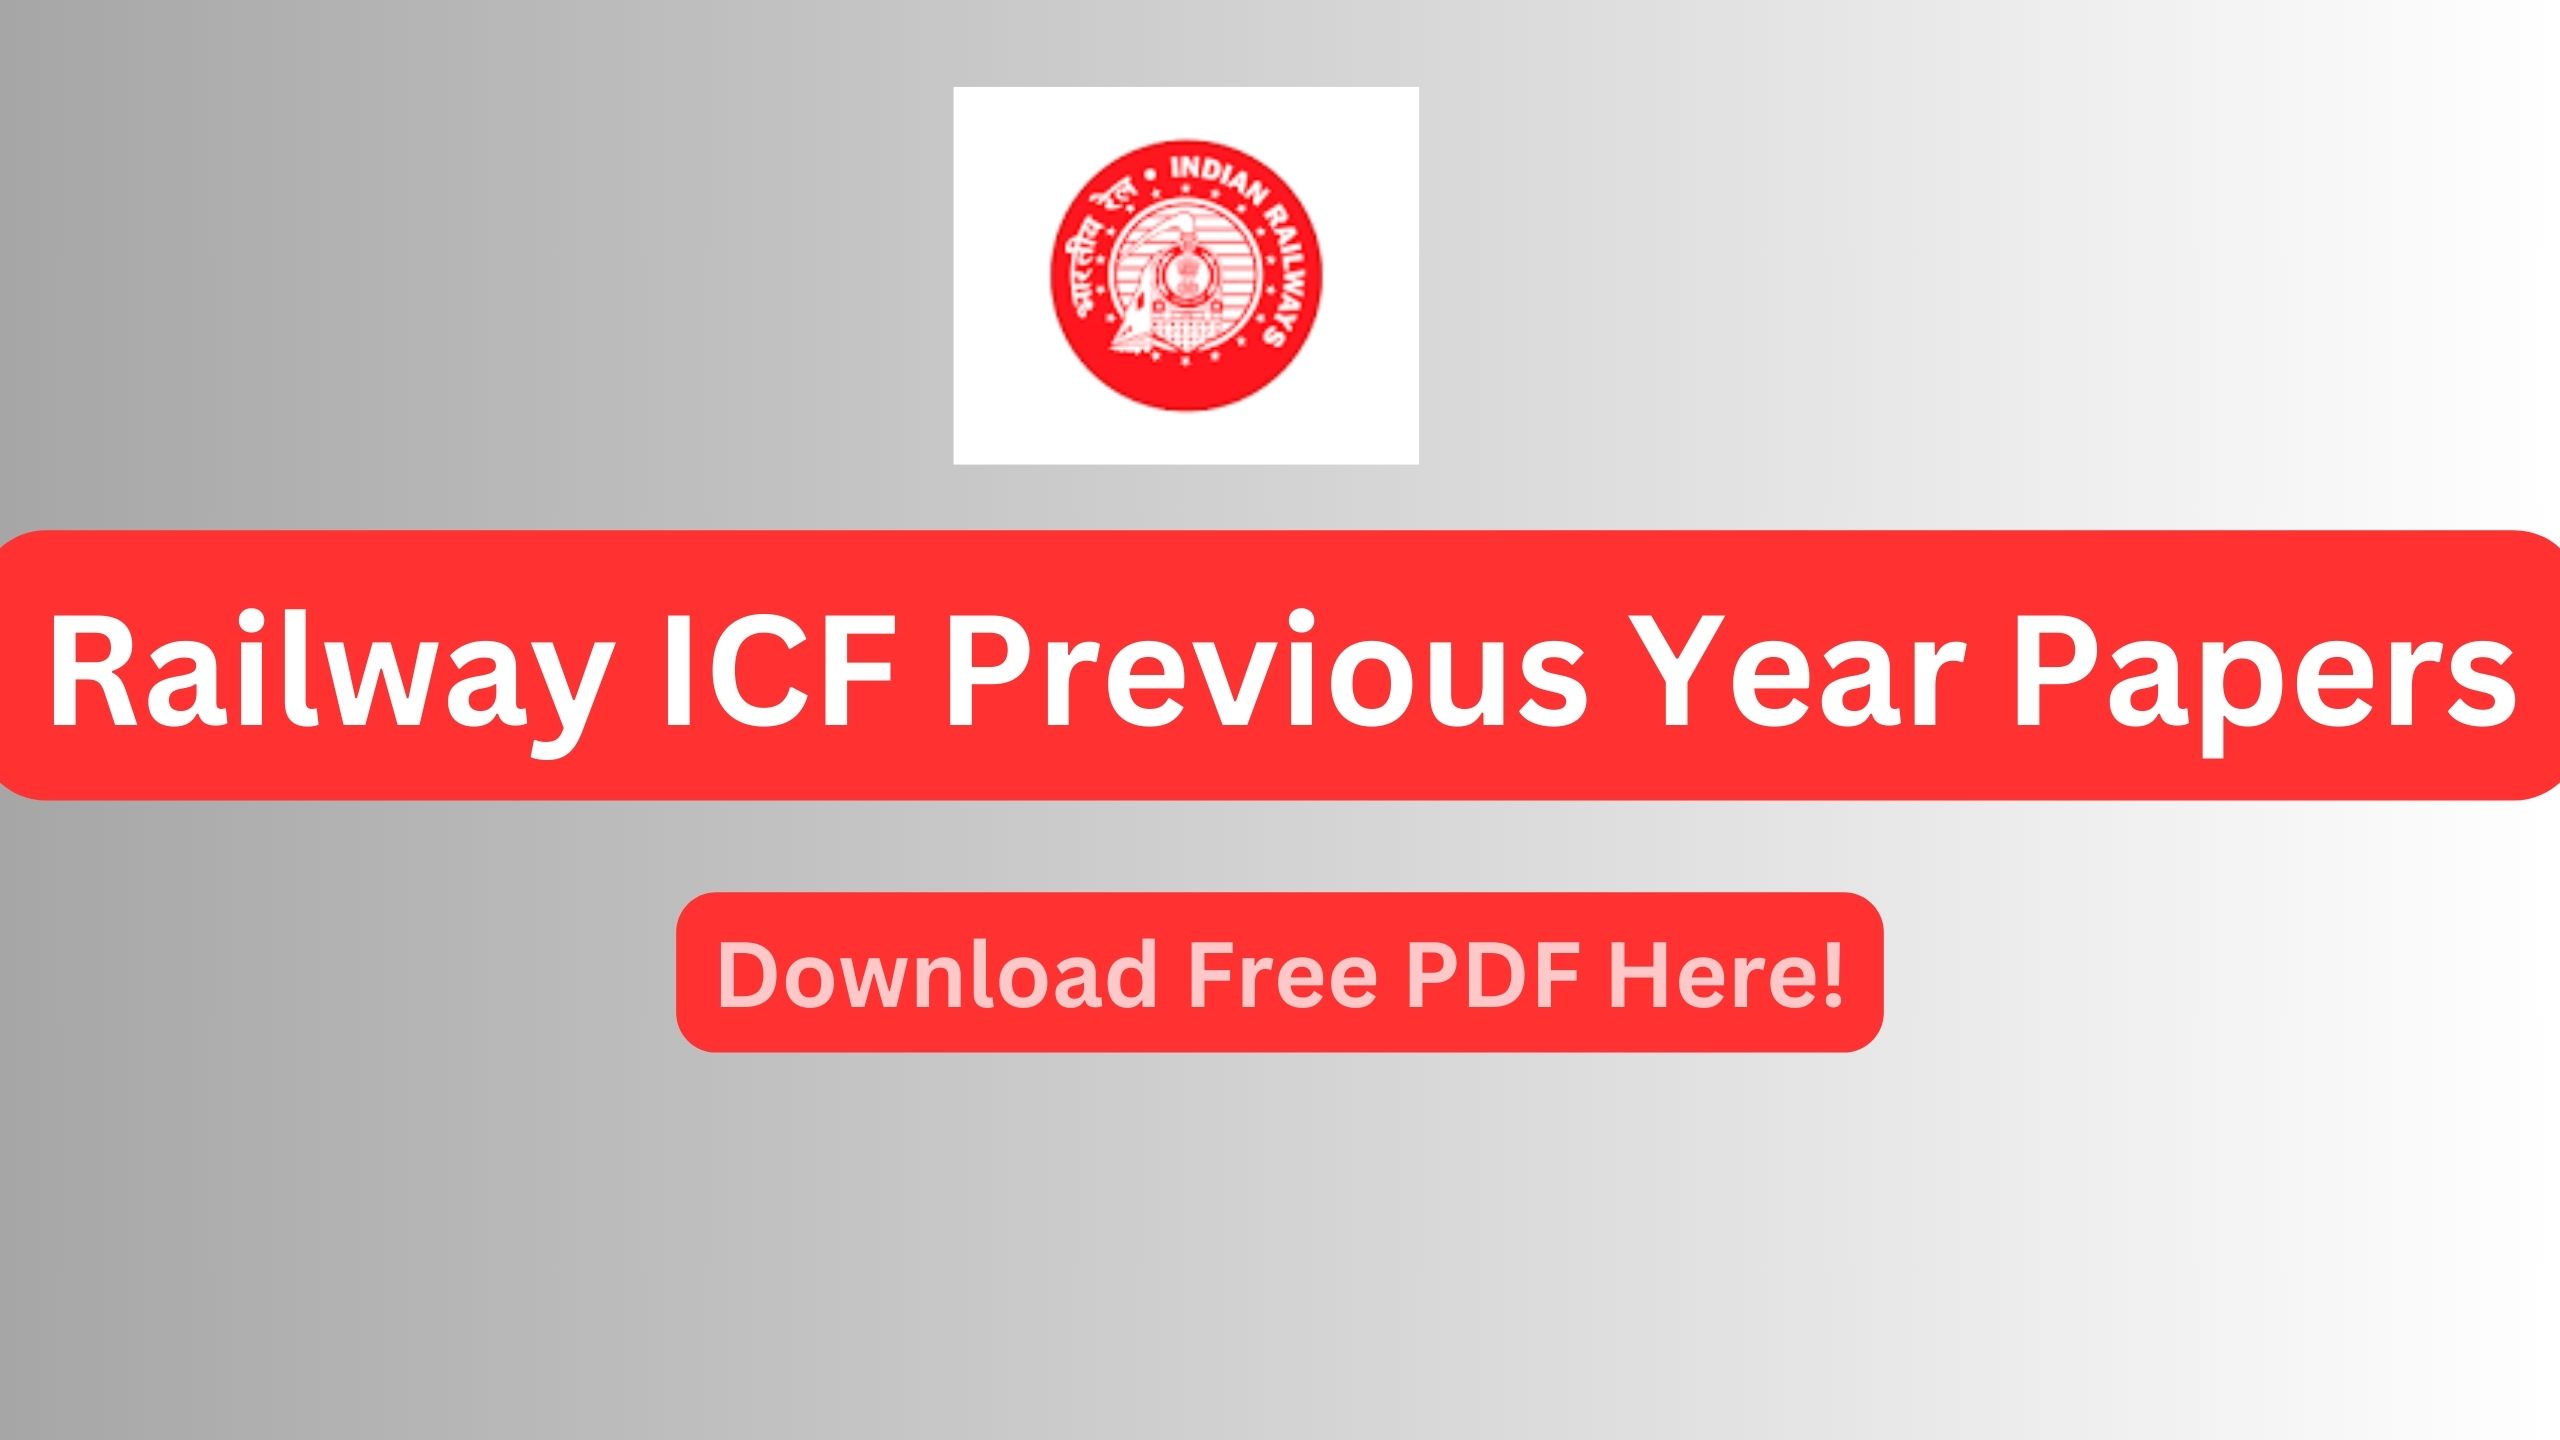 Railway ICF Previous Year Papers